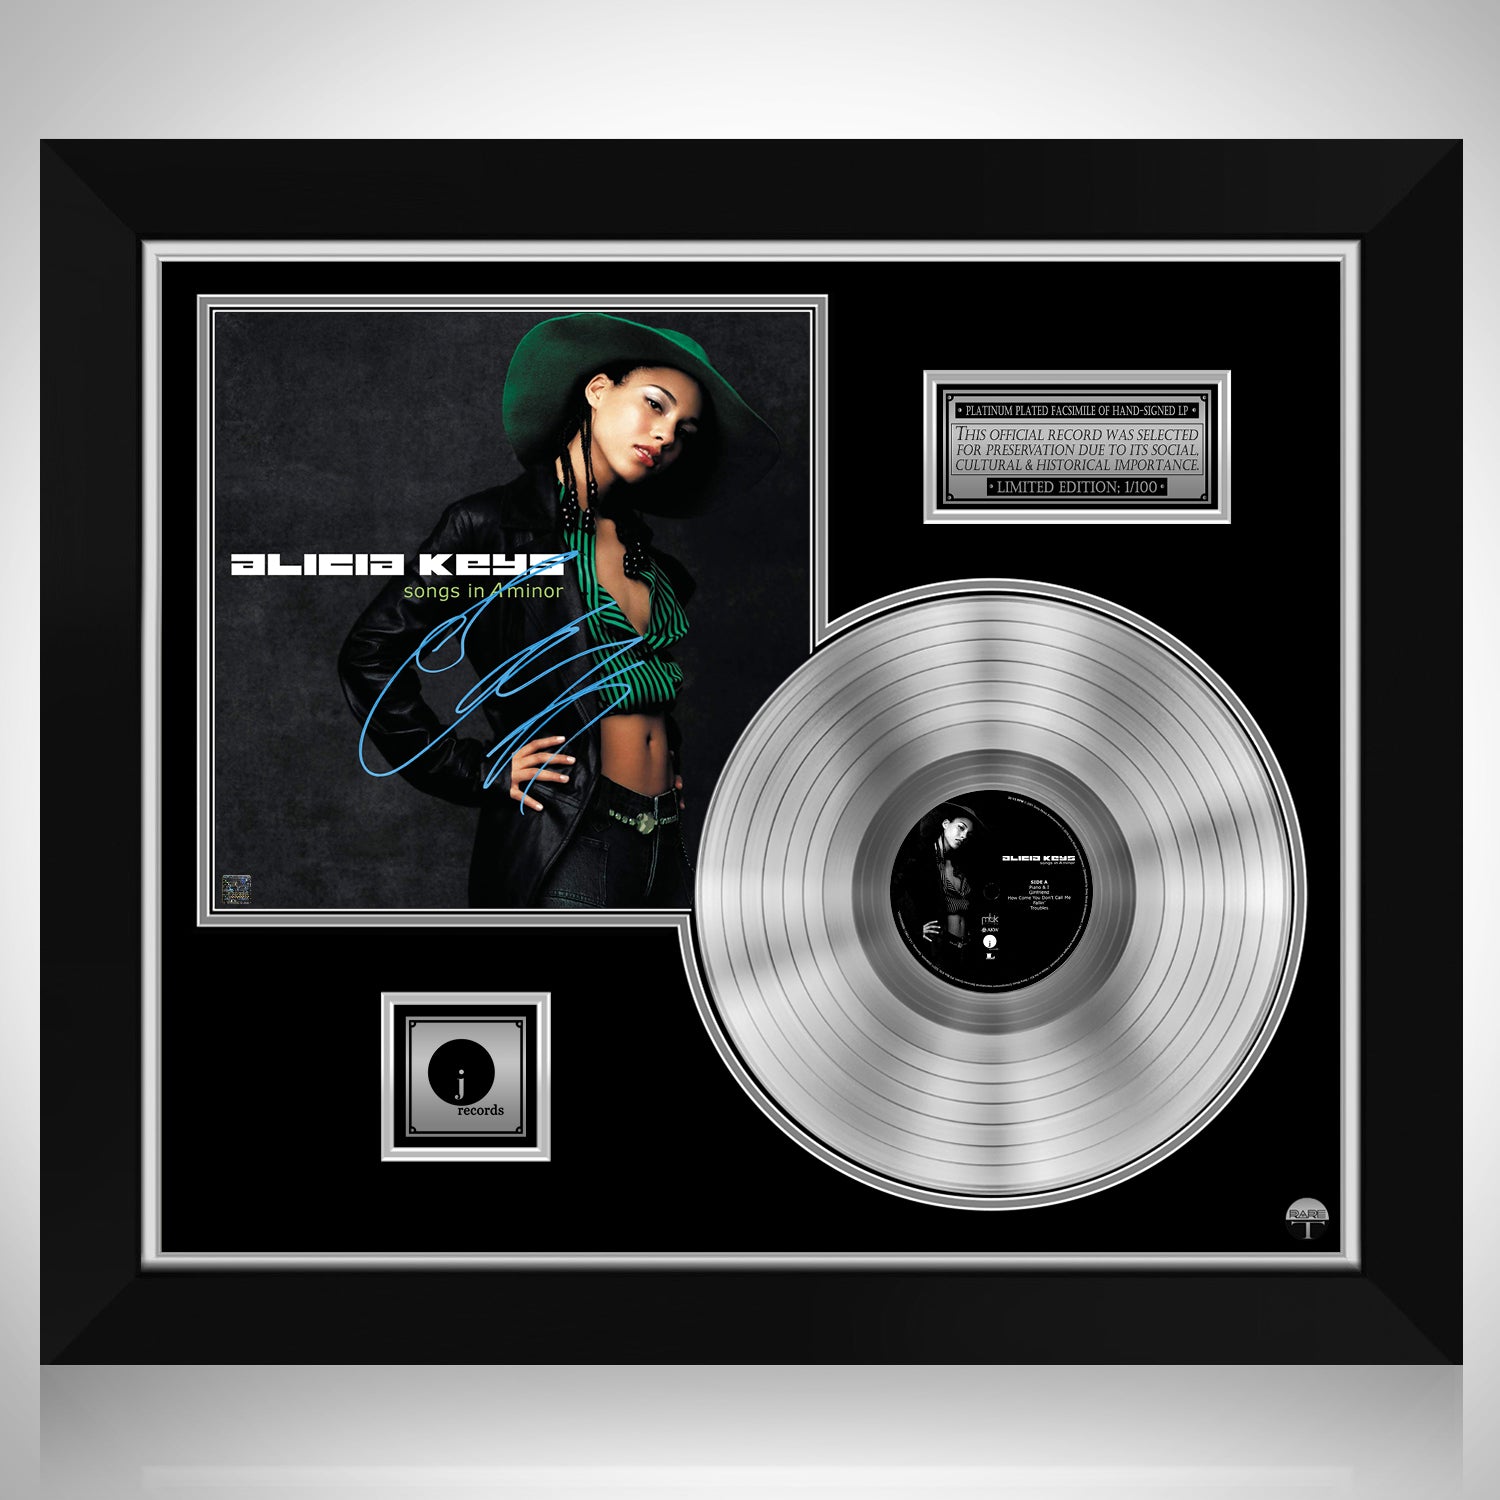 Alicia Keys - Songs in a Minor Platinum LP Limited Signature 